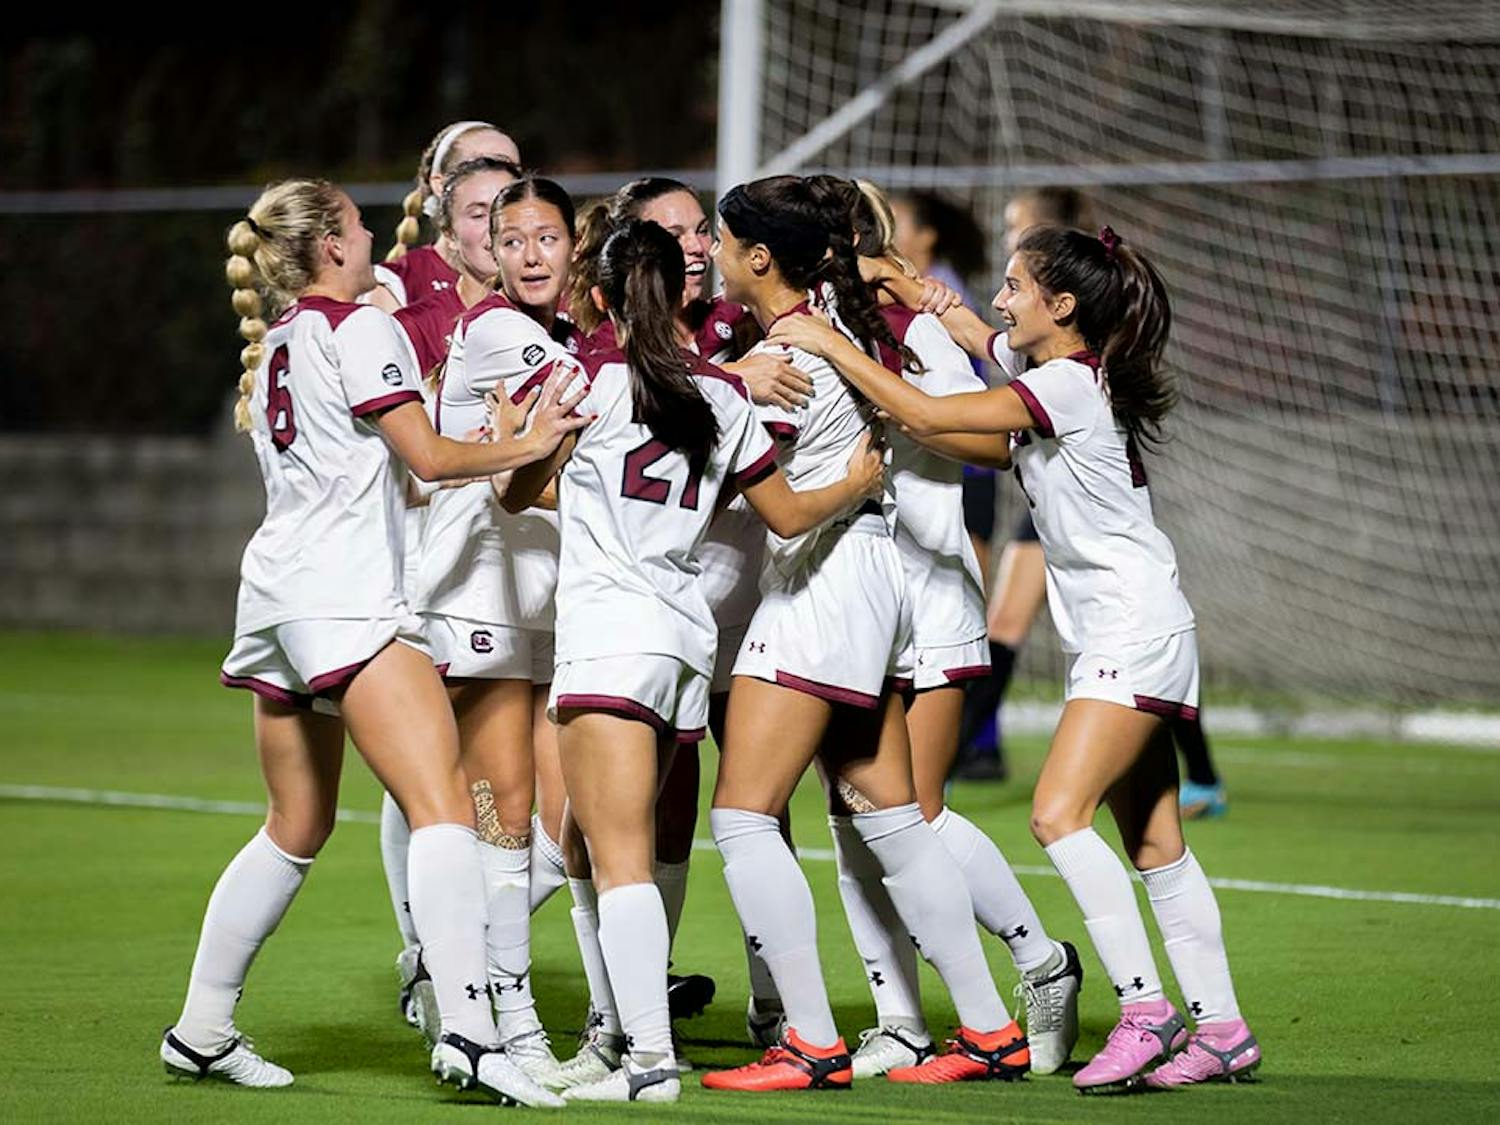 The South Carolina women's soccer team beat Wake Forest 2-0 in their first match of the NCAA Tournament. Junior forward Cat Barry and fifth year defender Jyllissa Harris scored both goals for the Gamecocks. &nbsp;Next week, South Carolina will travel to Durham, North Carolina, to take on Harvard on Nov. 18, 2022. Photos captured by Rachael Barkoff | The Daily Gamecock